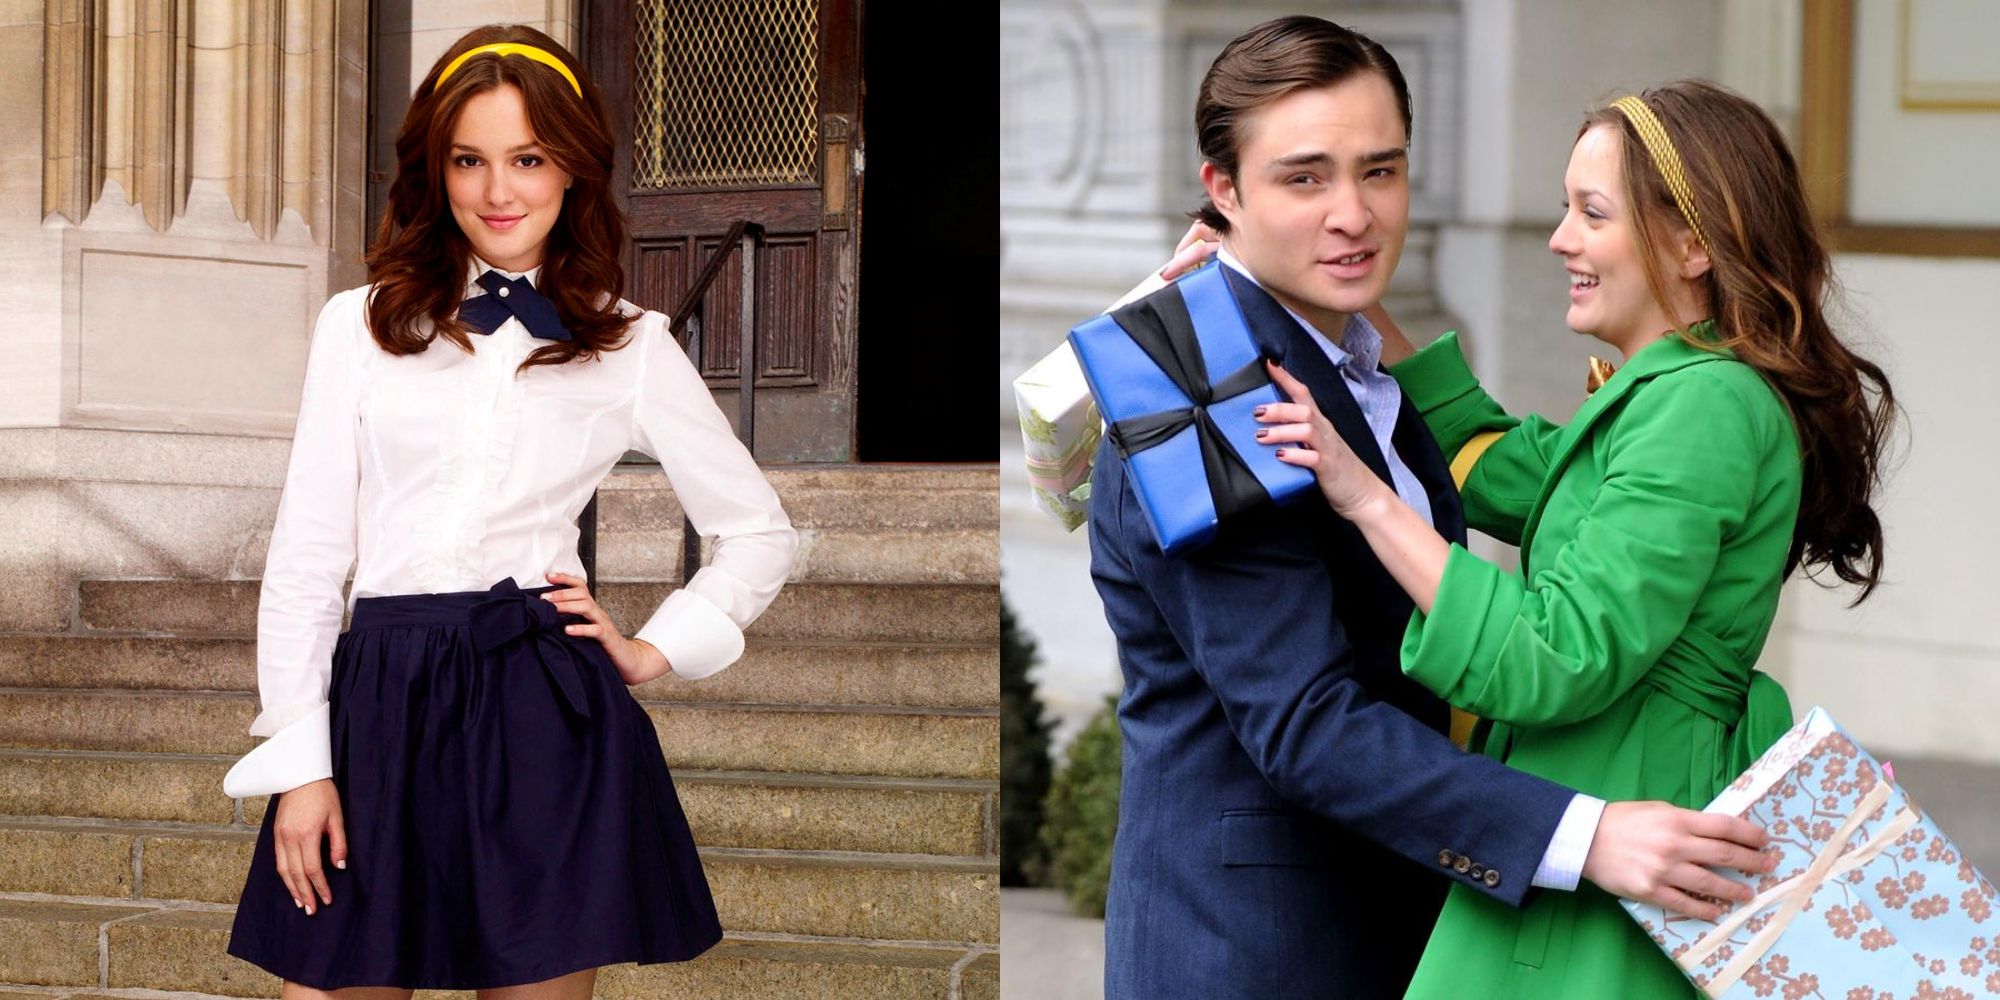 Leighton Meester as Blair Waldorf in Gossip Girl alone and with Chuck